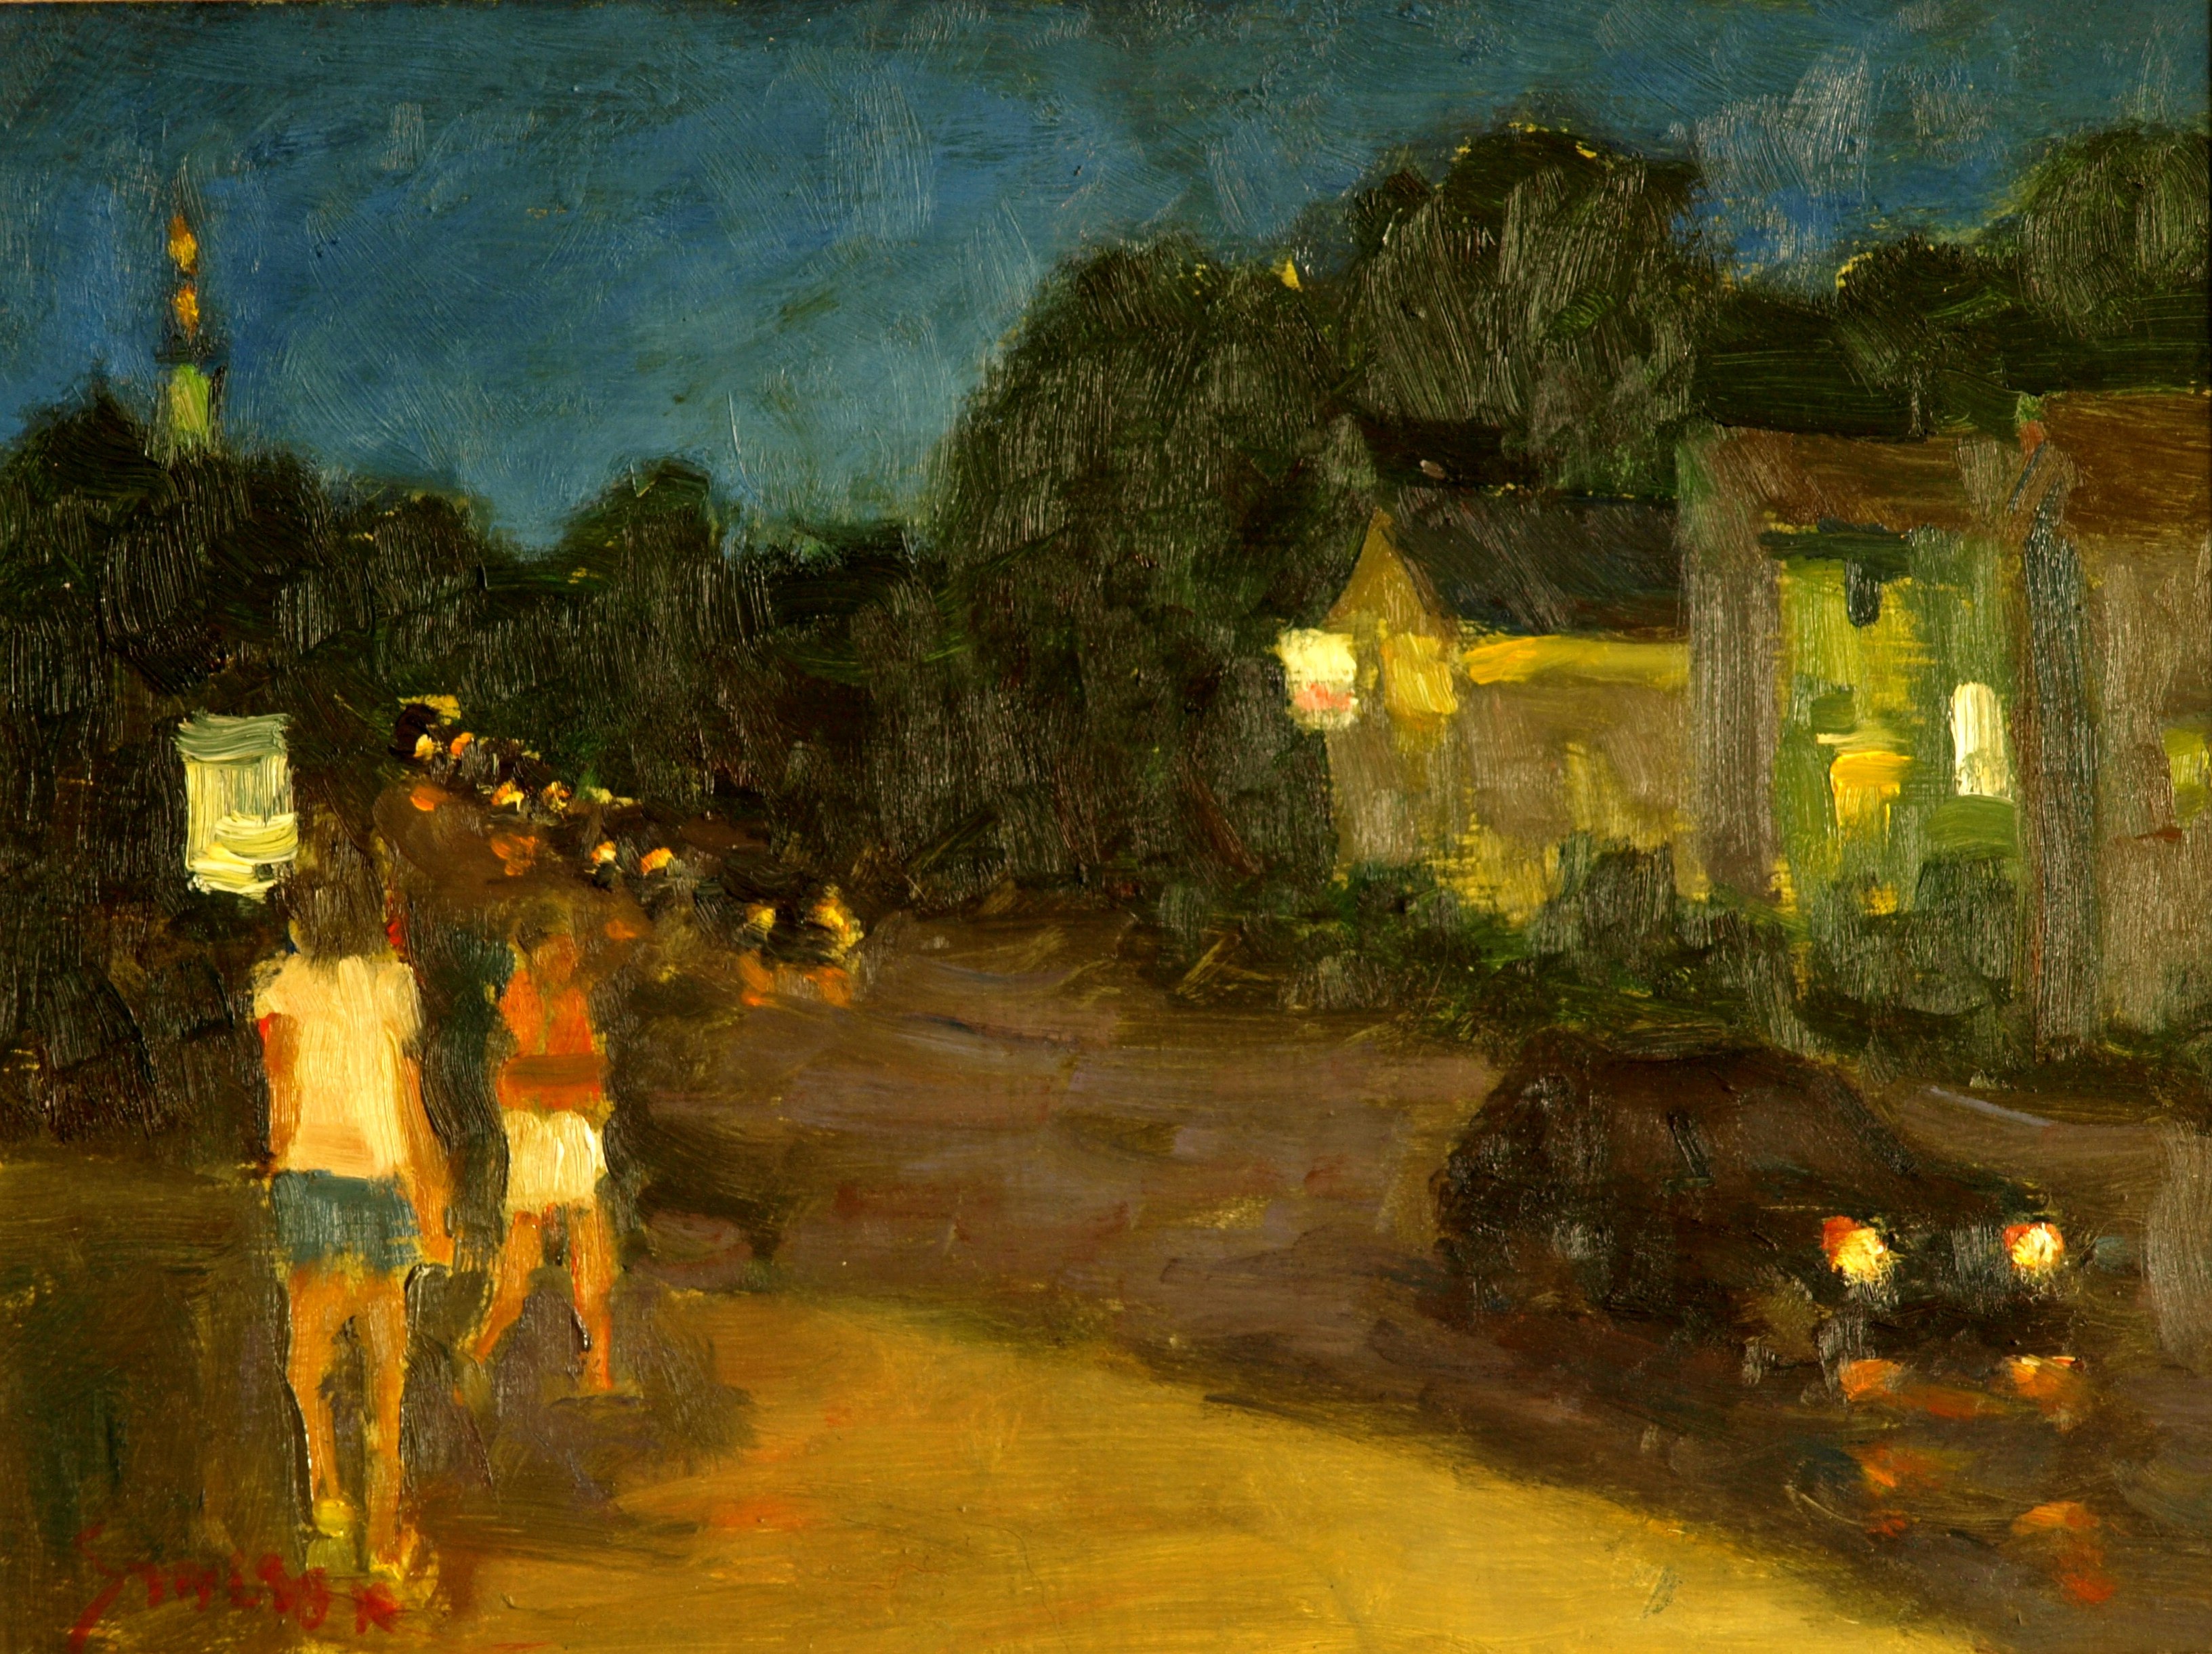 Night in Mystic, Oil on Panel, 9 x 12 Inches, by Richard Stalter, $225